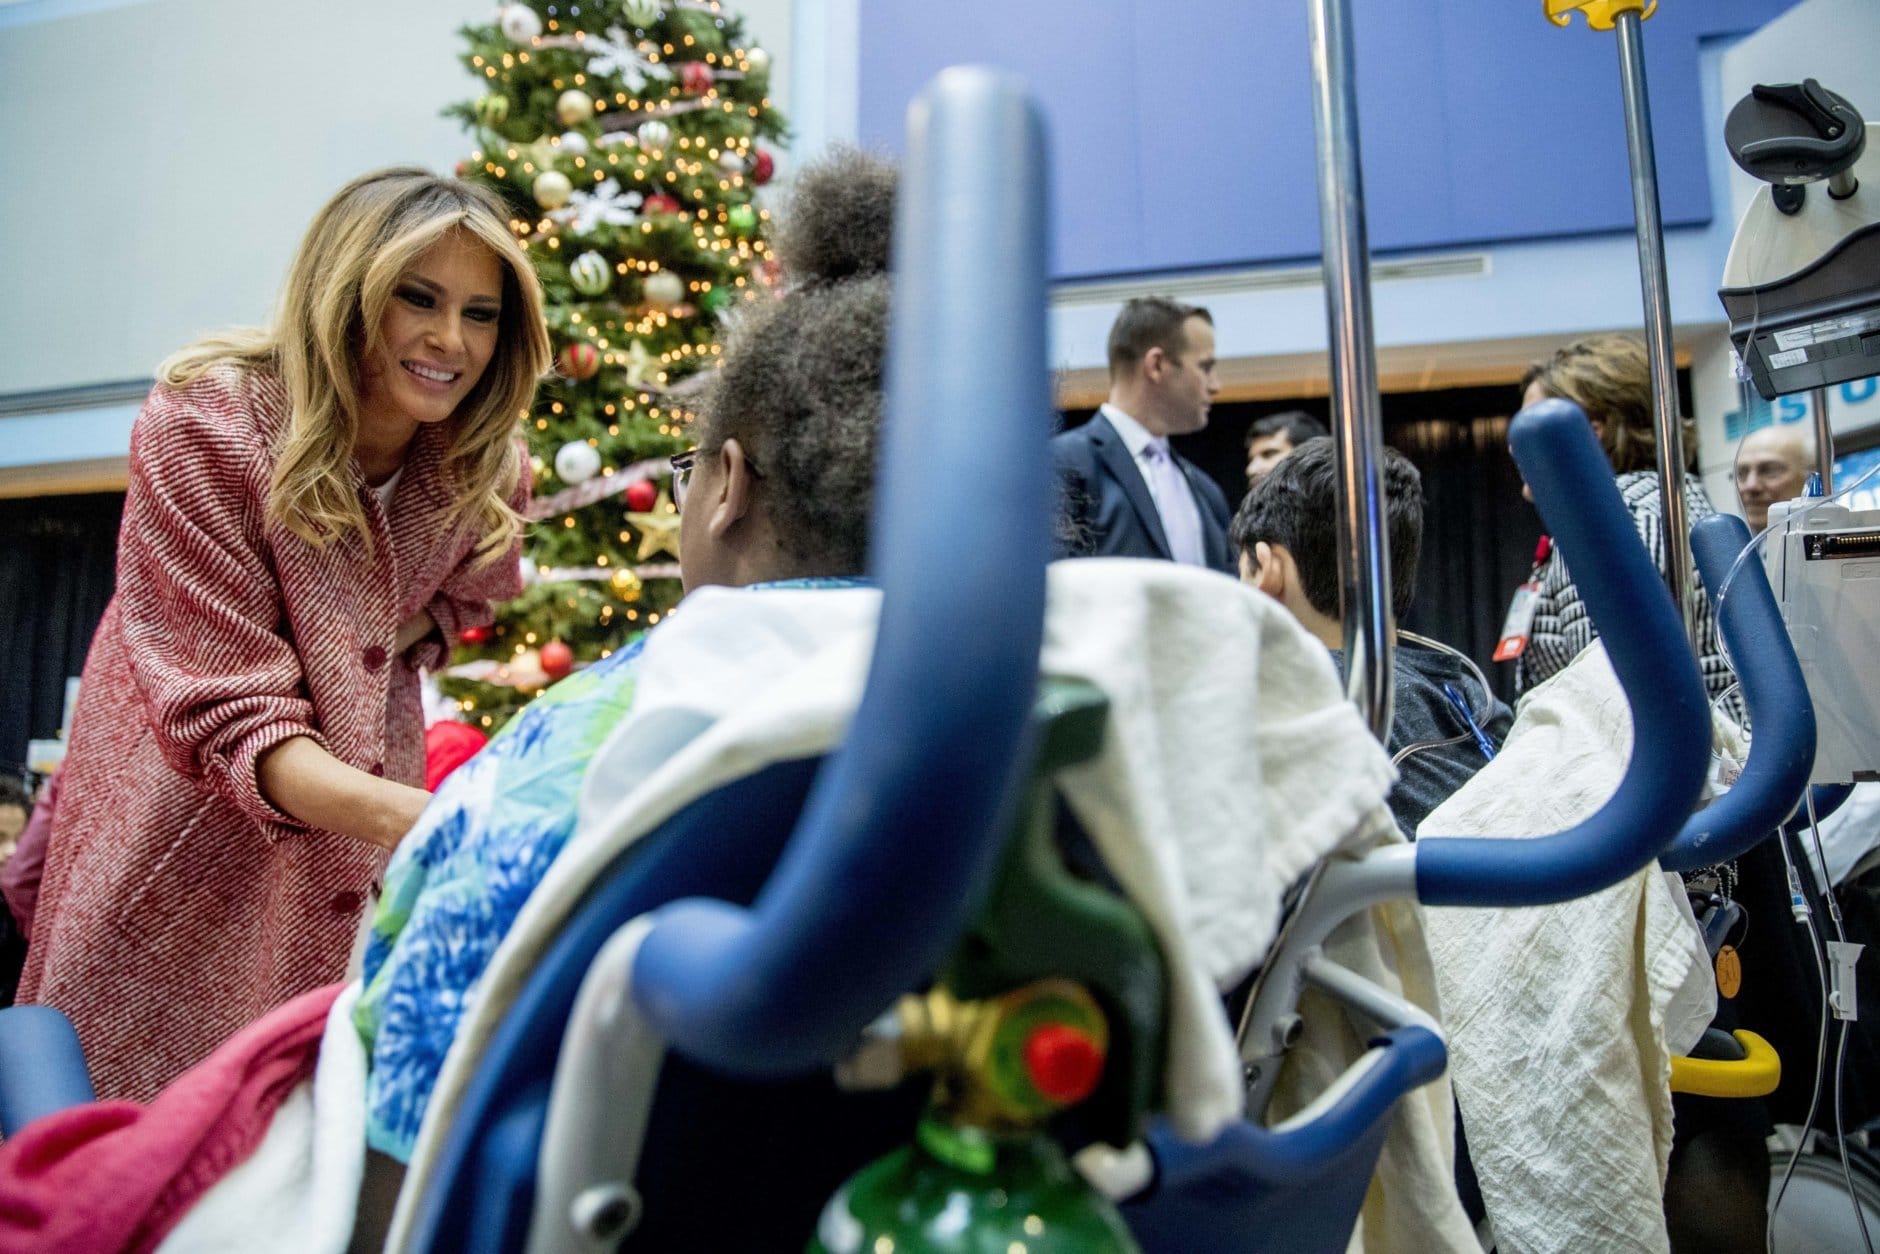 First lady Melania Trump greets patients in the audience after reading "Oliver the Ornament" to children at Children's National Health System, Thursday, Dec. 13, 2018, in Washington. (AP Photo/Andrew Harnik)